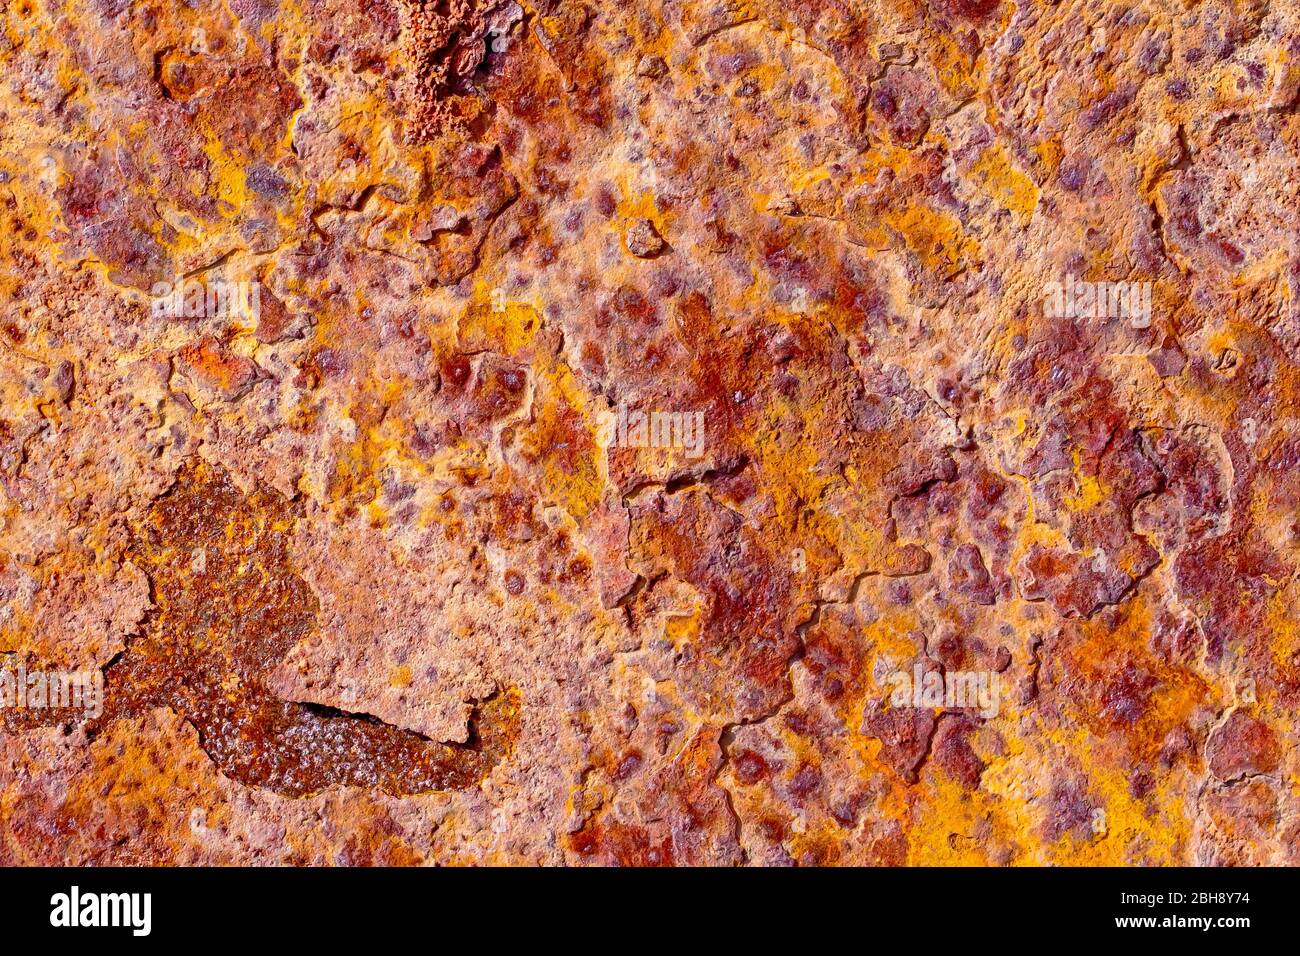 Close up abstract image of the patterns of colour on a sunlit piece of rusty metal. Stock Photo